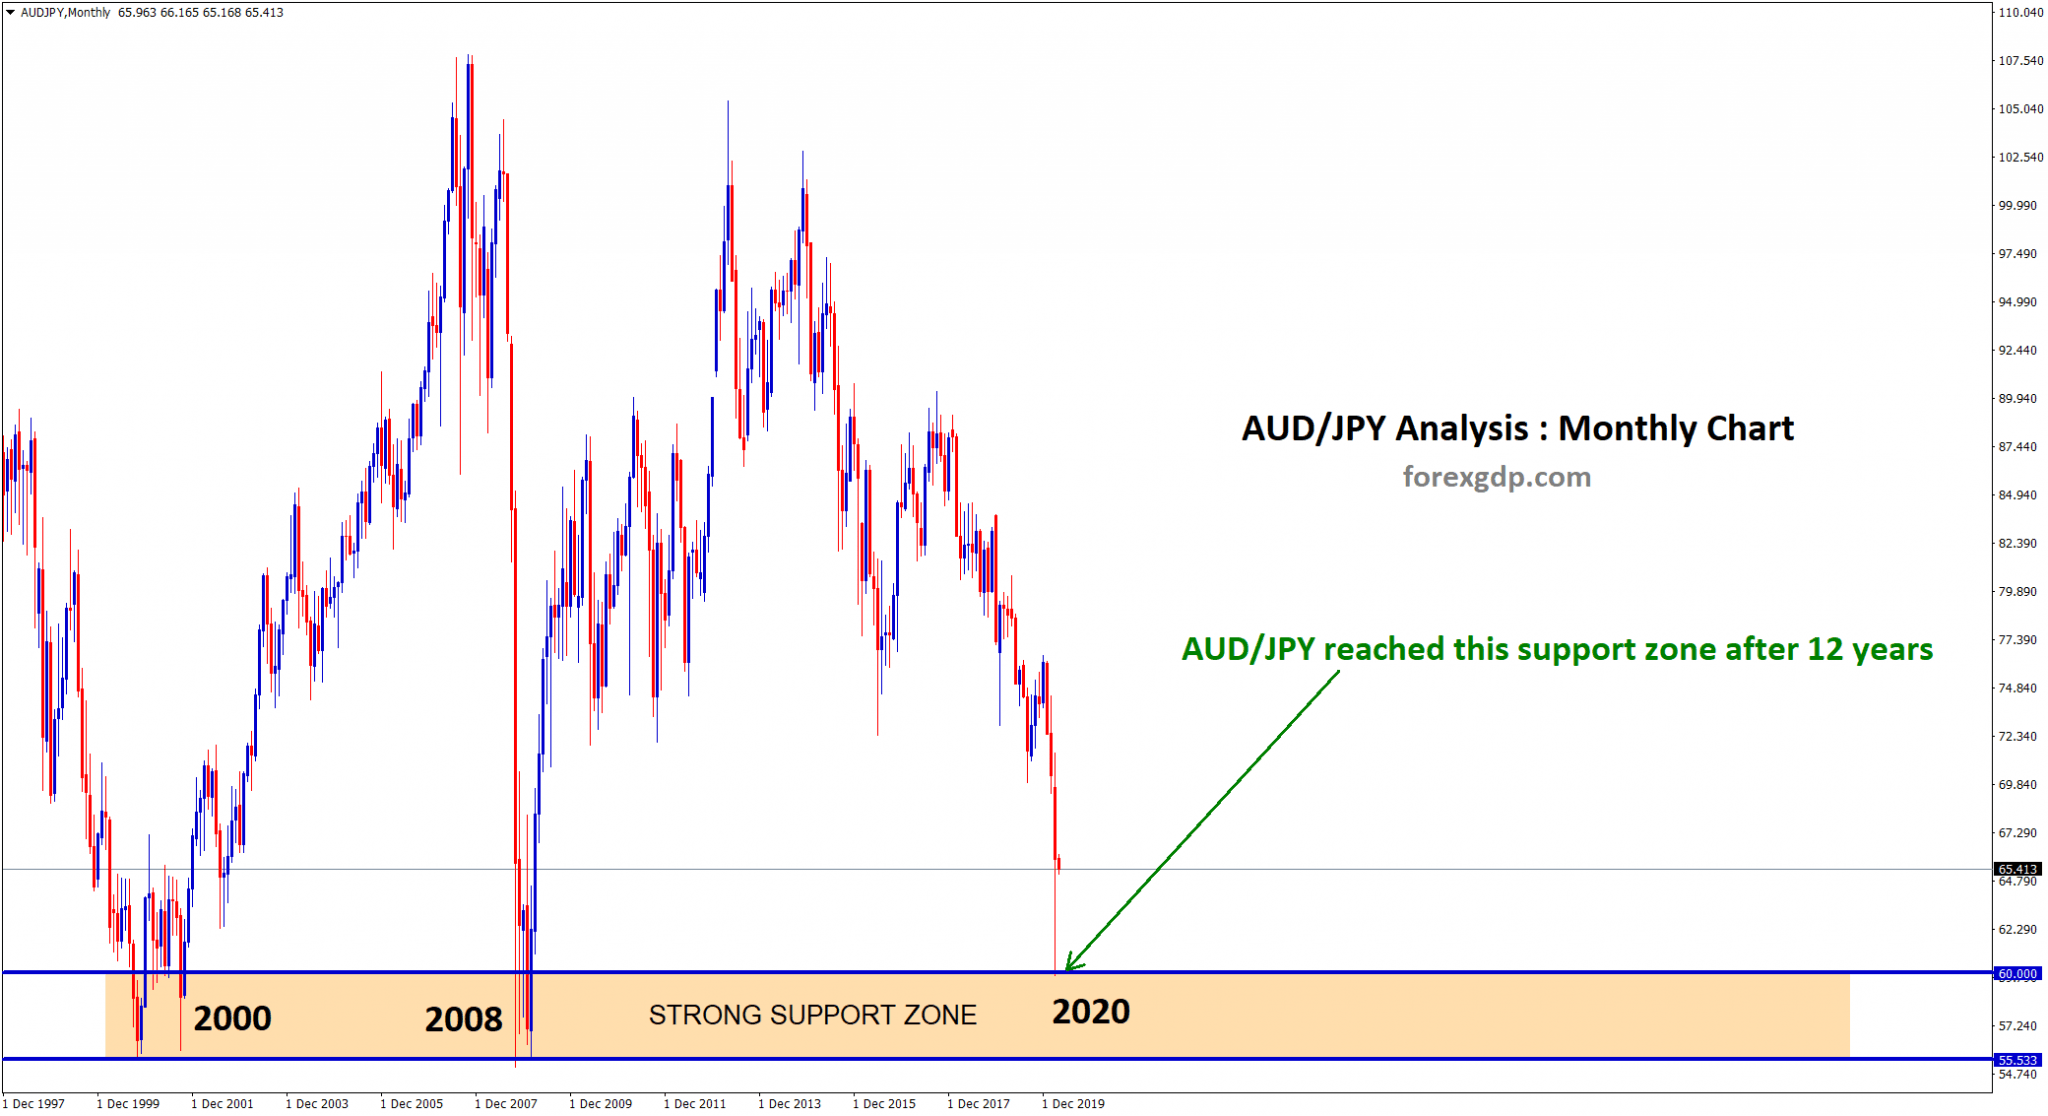 After 12 years, AUDJPY hit the strong support zone